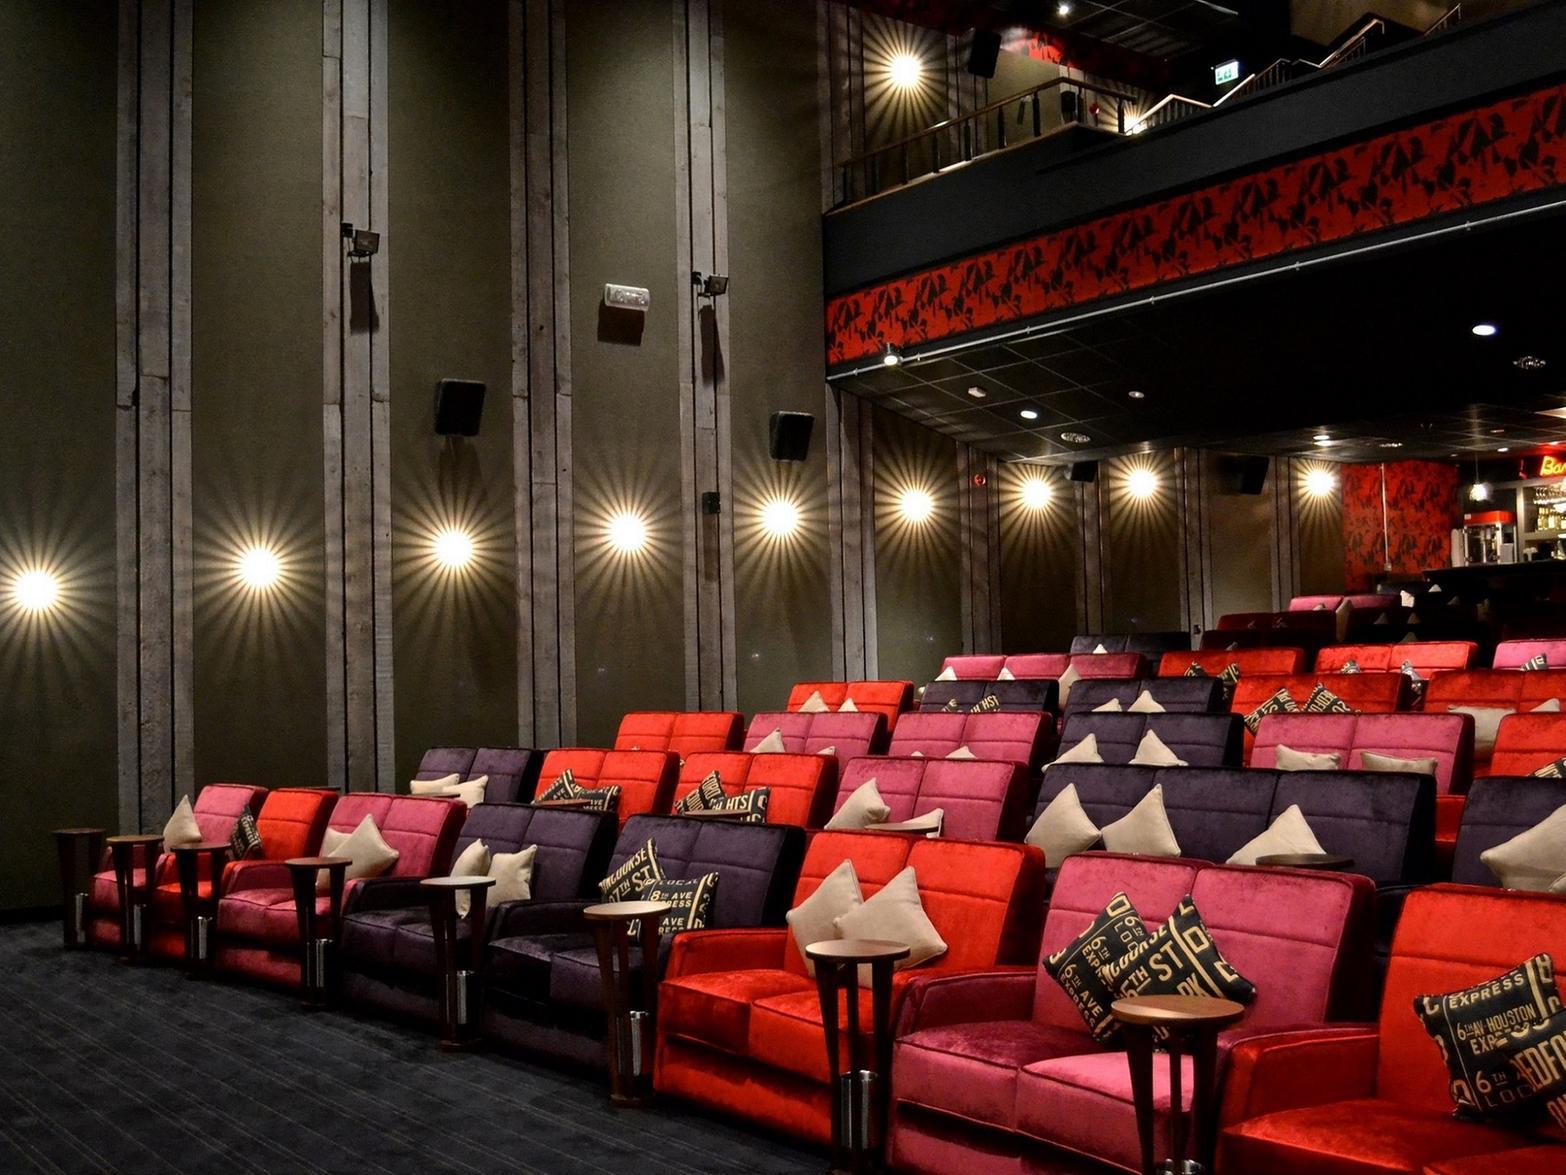 If you are keen to escape reality for a while, Everyman Cinema is a great spot to get lost in another world for a few hours, with films including Dolittle, 1917, Emma and Notting Hill all screening on Valentines Day.